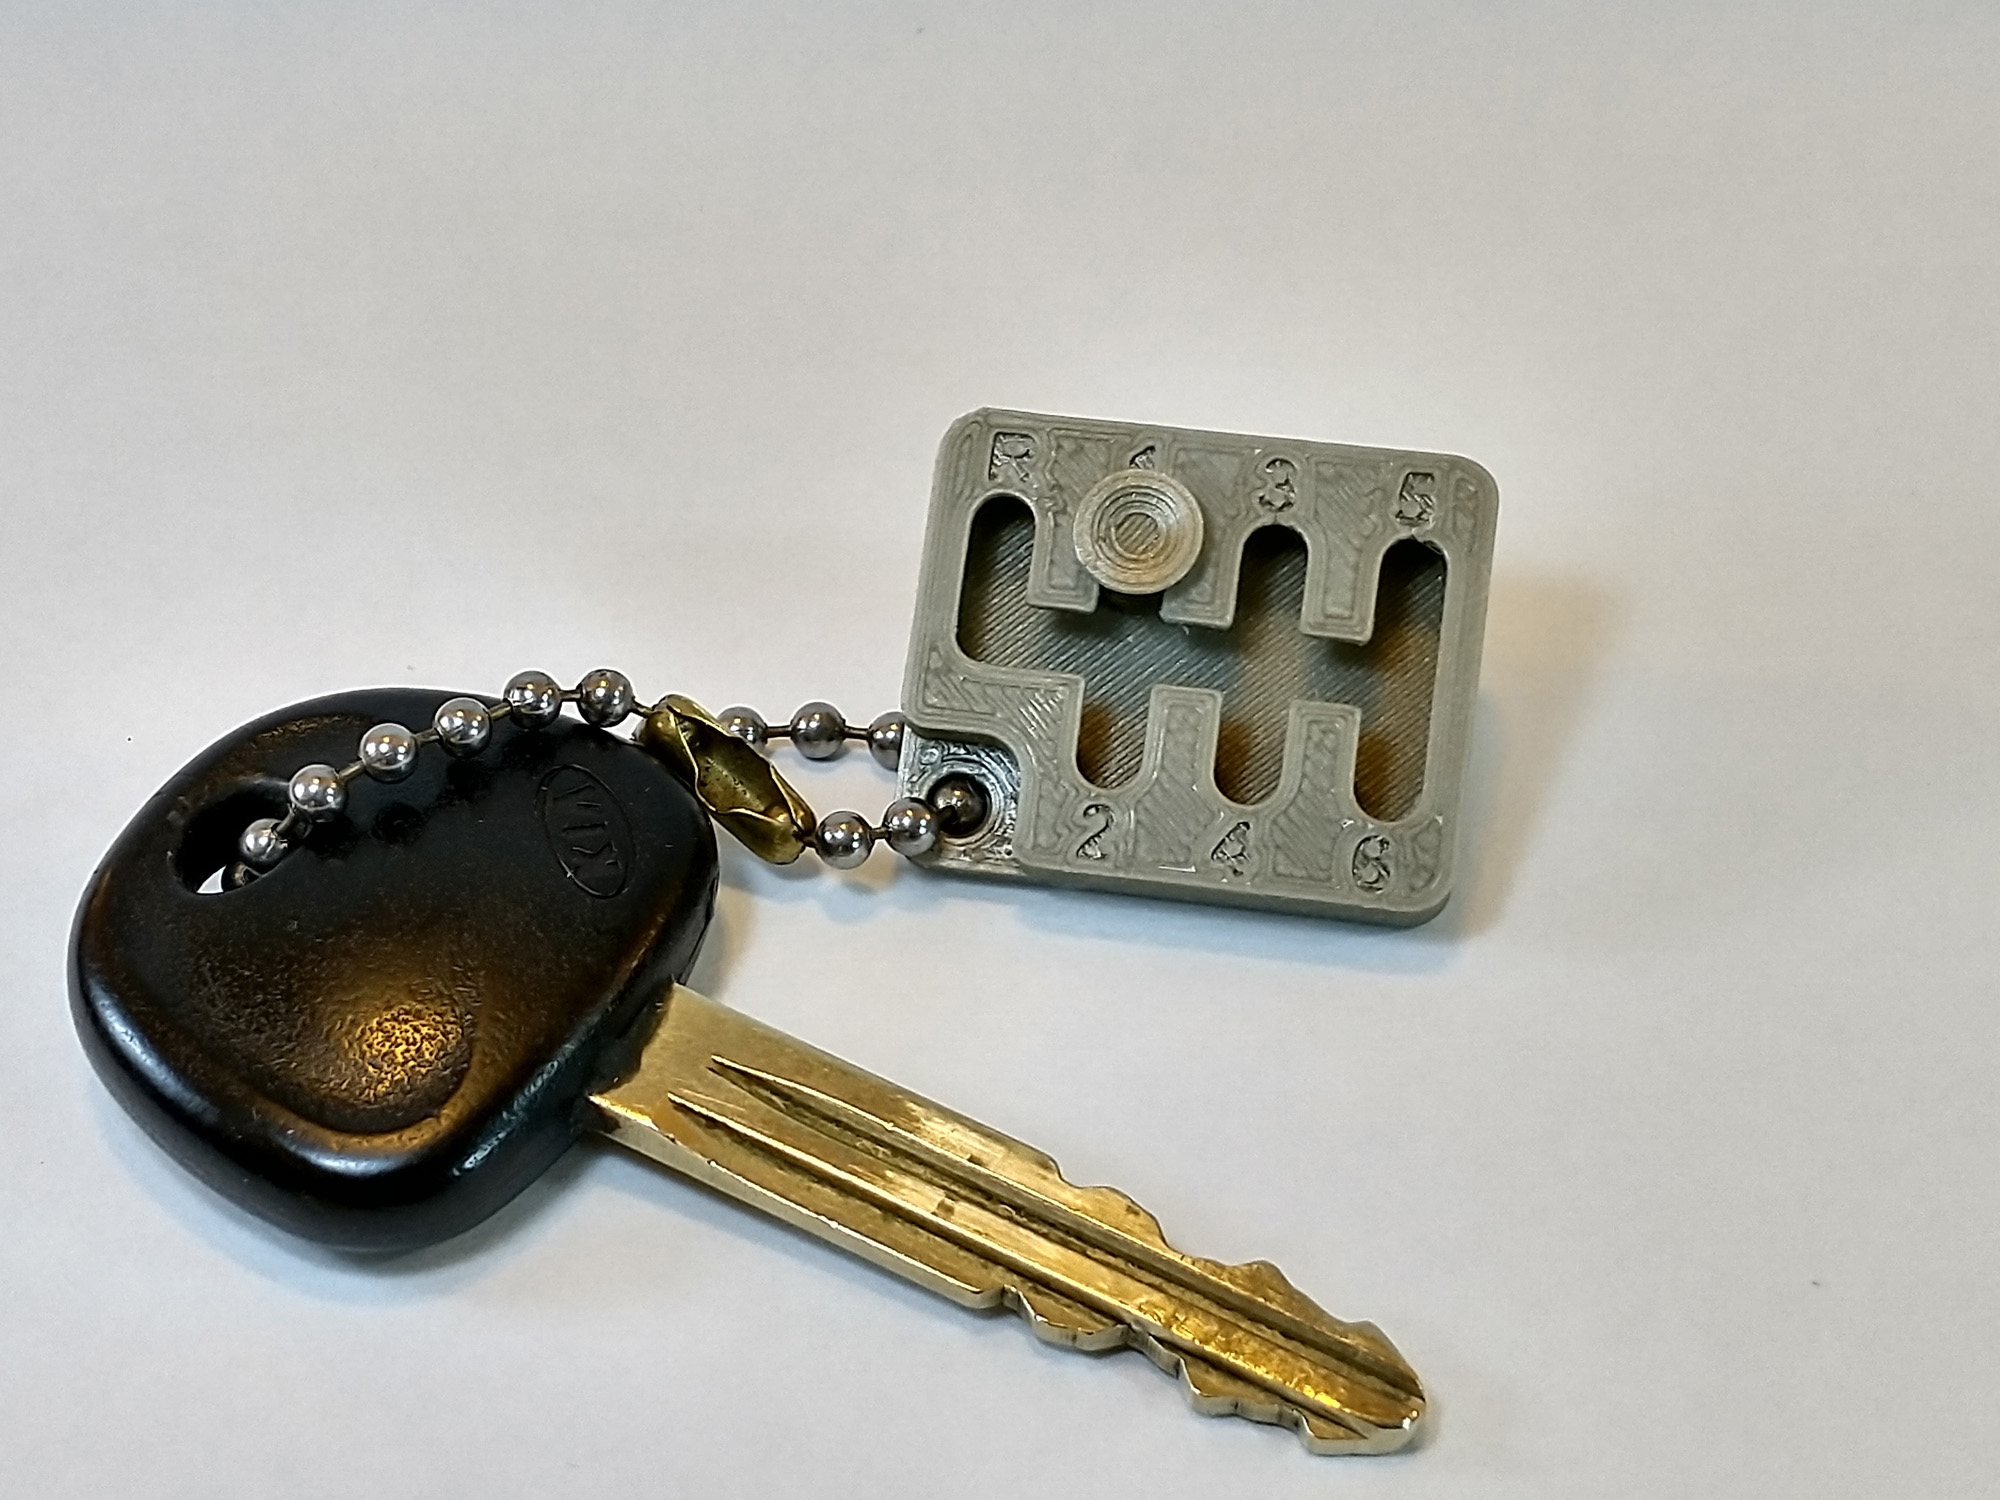 Six-Speed Keychain Shifter (print-in-place)